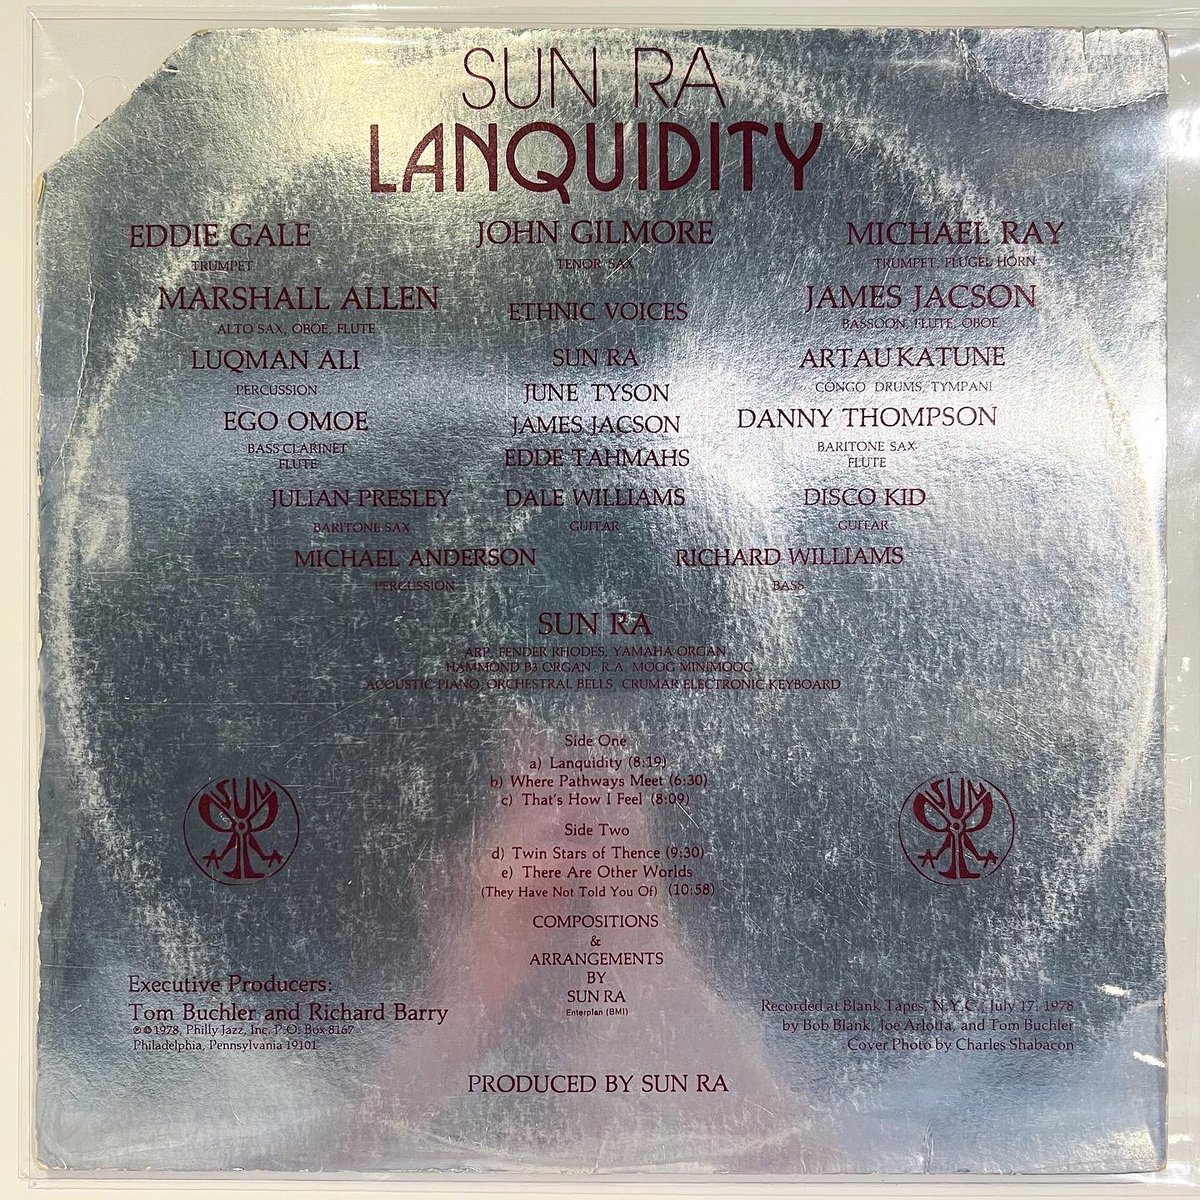 A special one today- it doesn’t get much better than this in our world. Lanquidity in the shop! #newarrivals Sun Ra - Lanquidity, Philly Jazz 1978 ✌️ #originalpressings #sunra #jazz  #spiritualjazz #cosmicjazz #freejazz #phillyjazz #vinyl #records #yoyorecordslondon